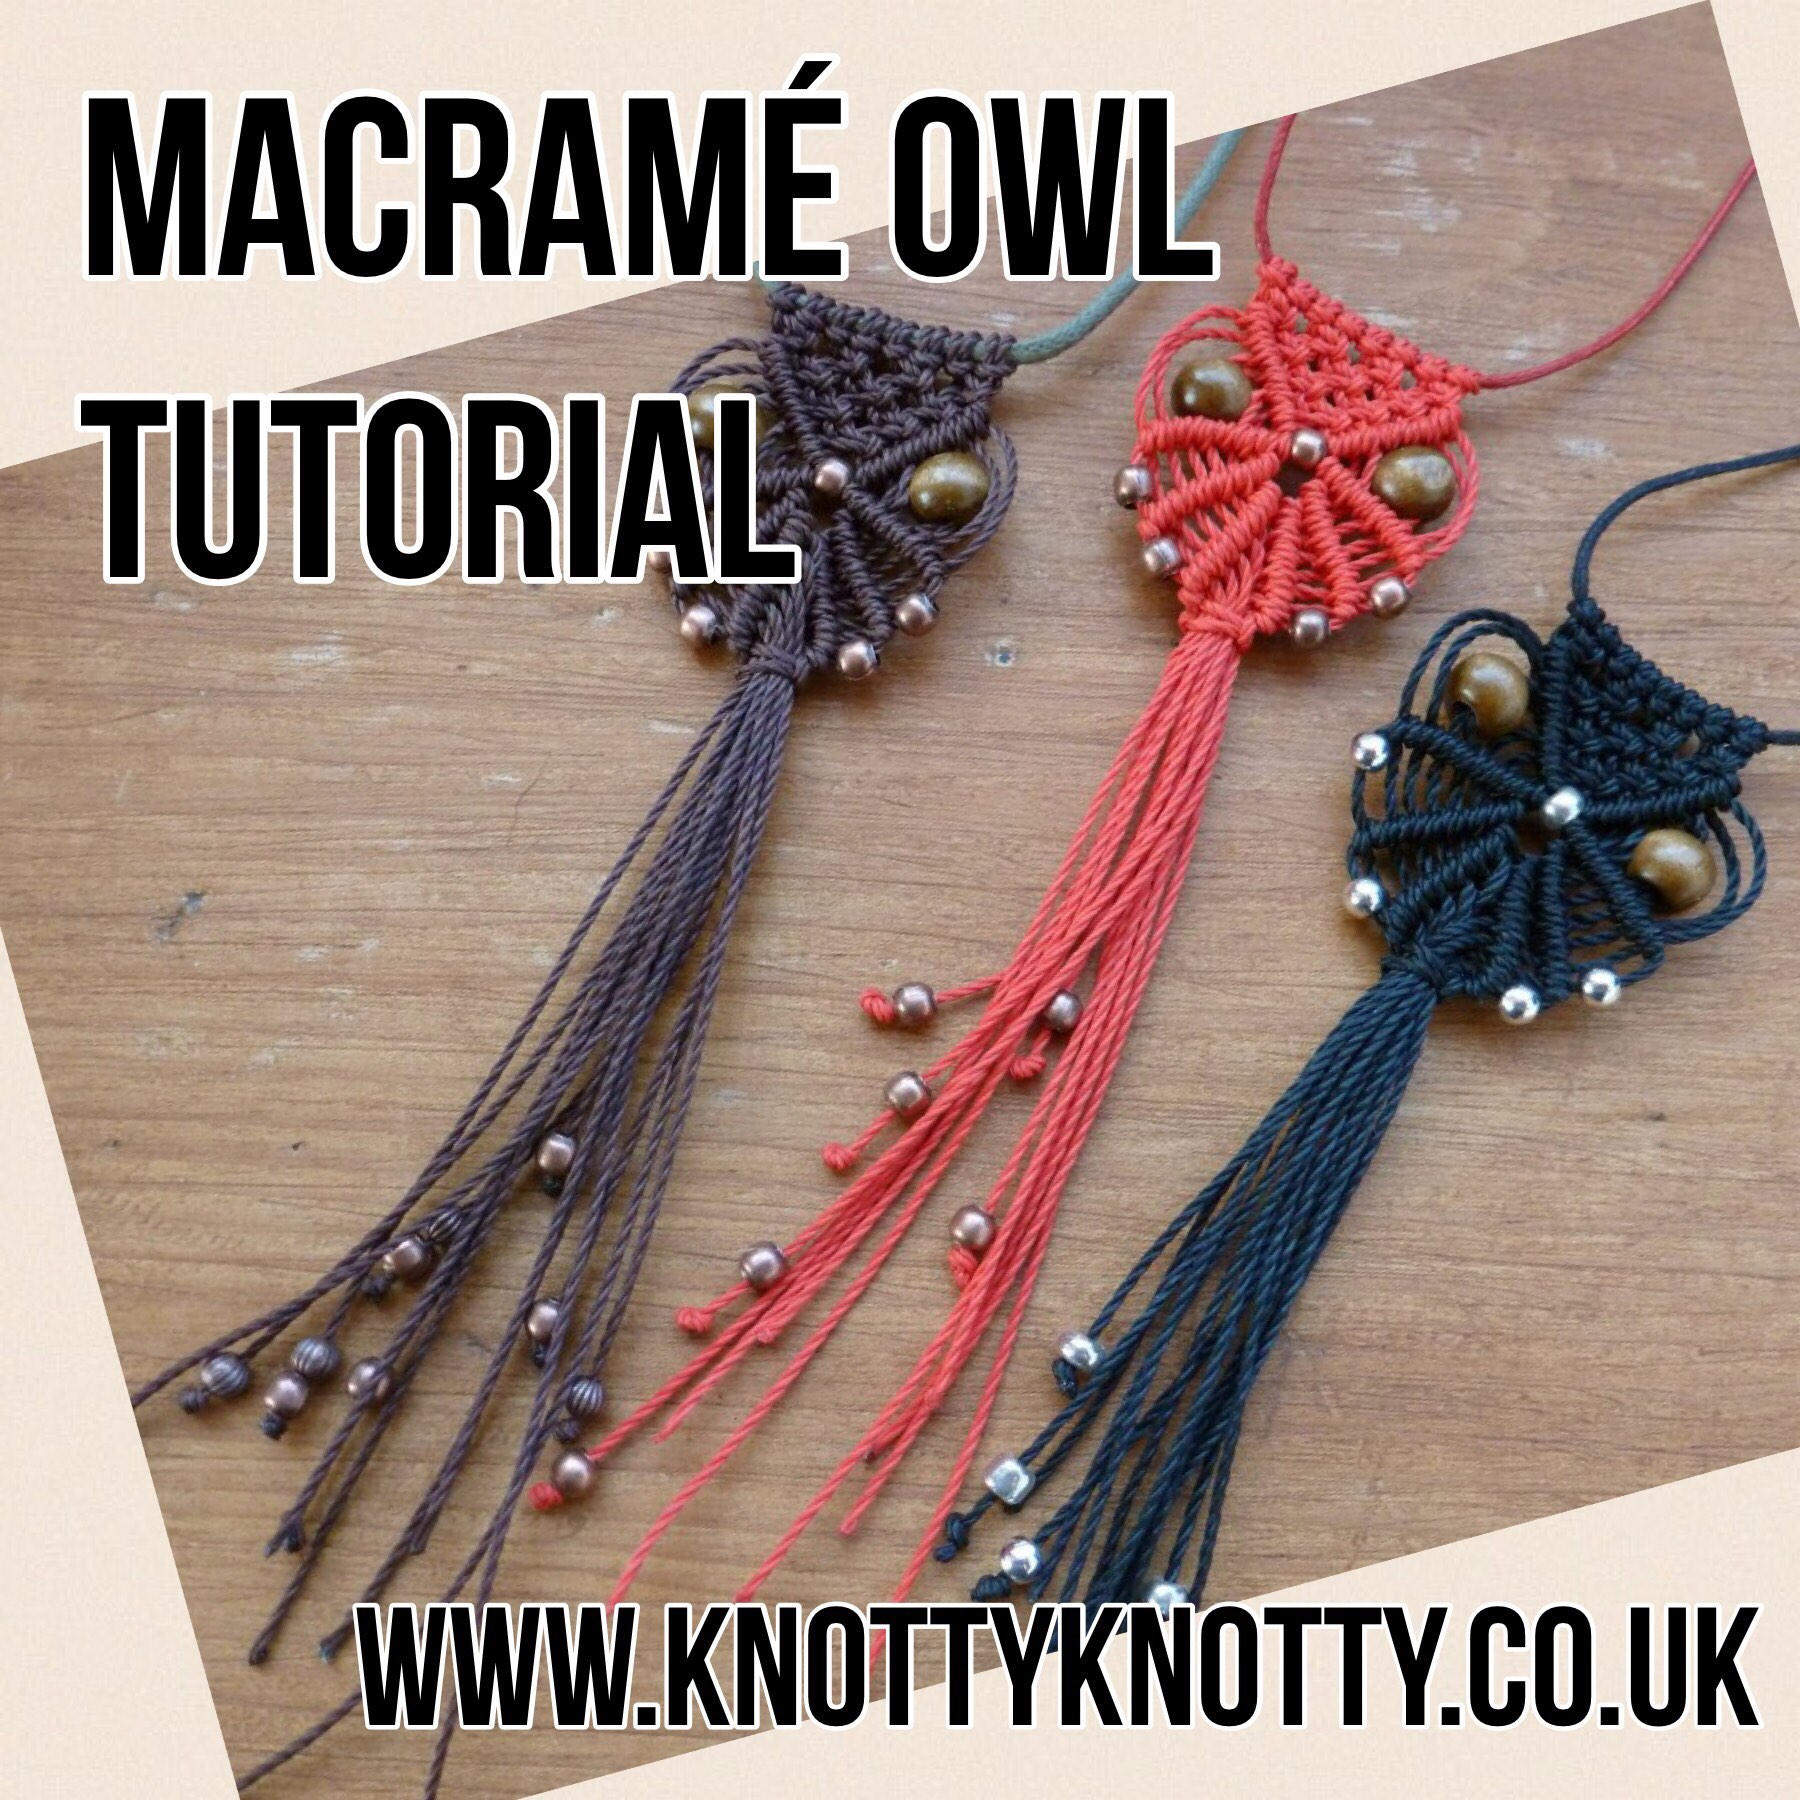 Leather cord Necklace DIY with Owl Pendant - Beginners Tutorial